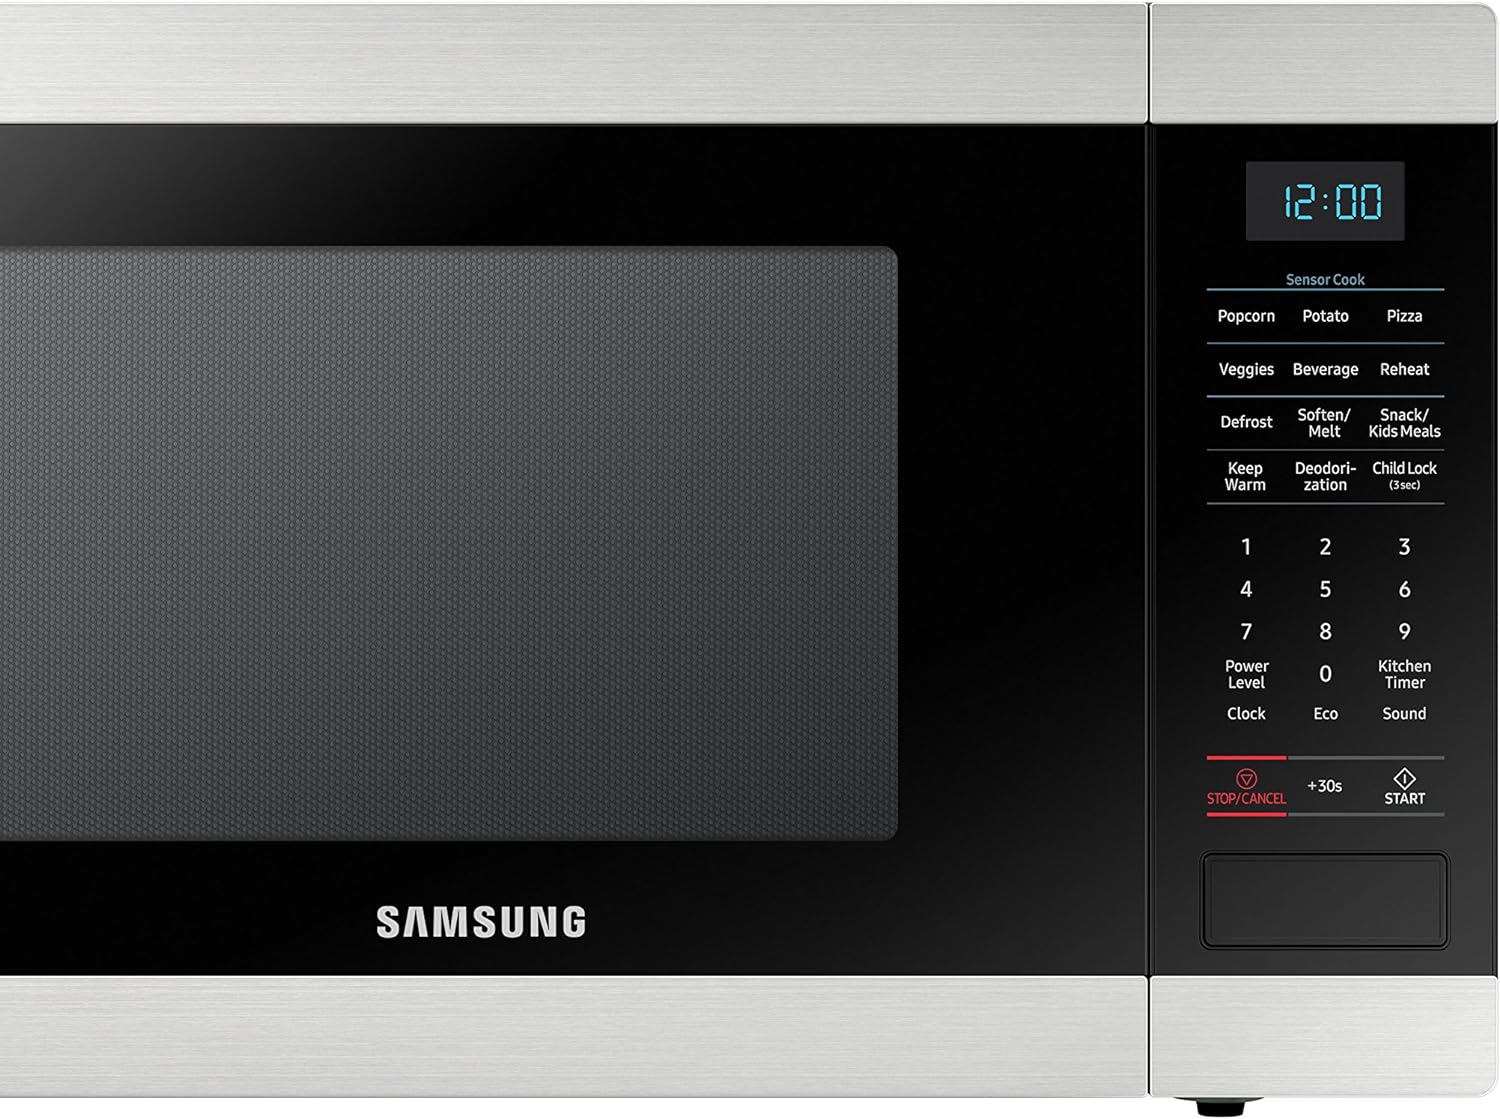 Positive view of the microwave oven